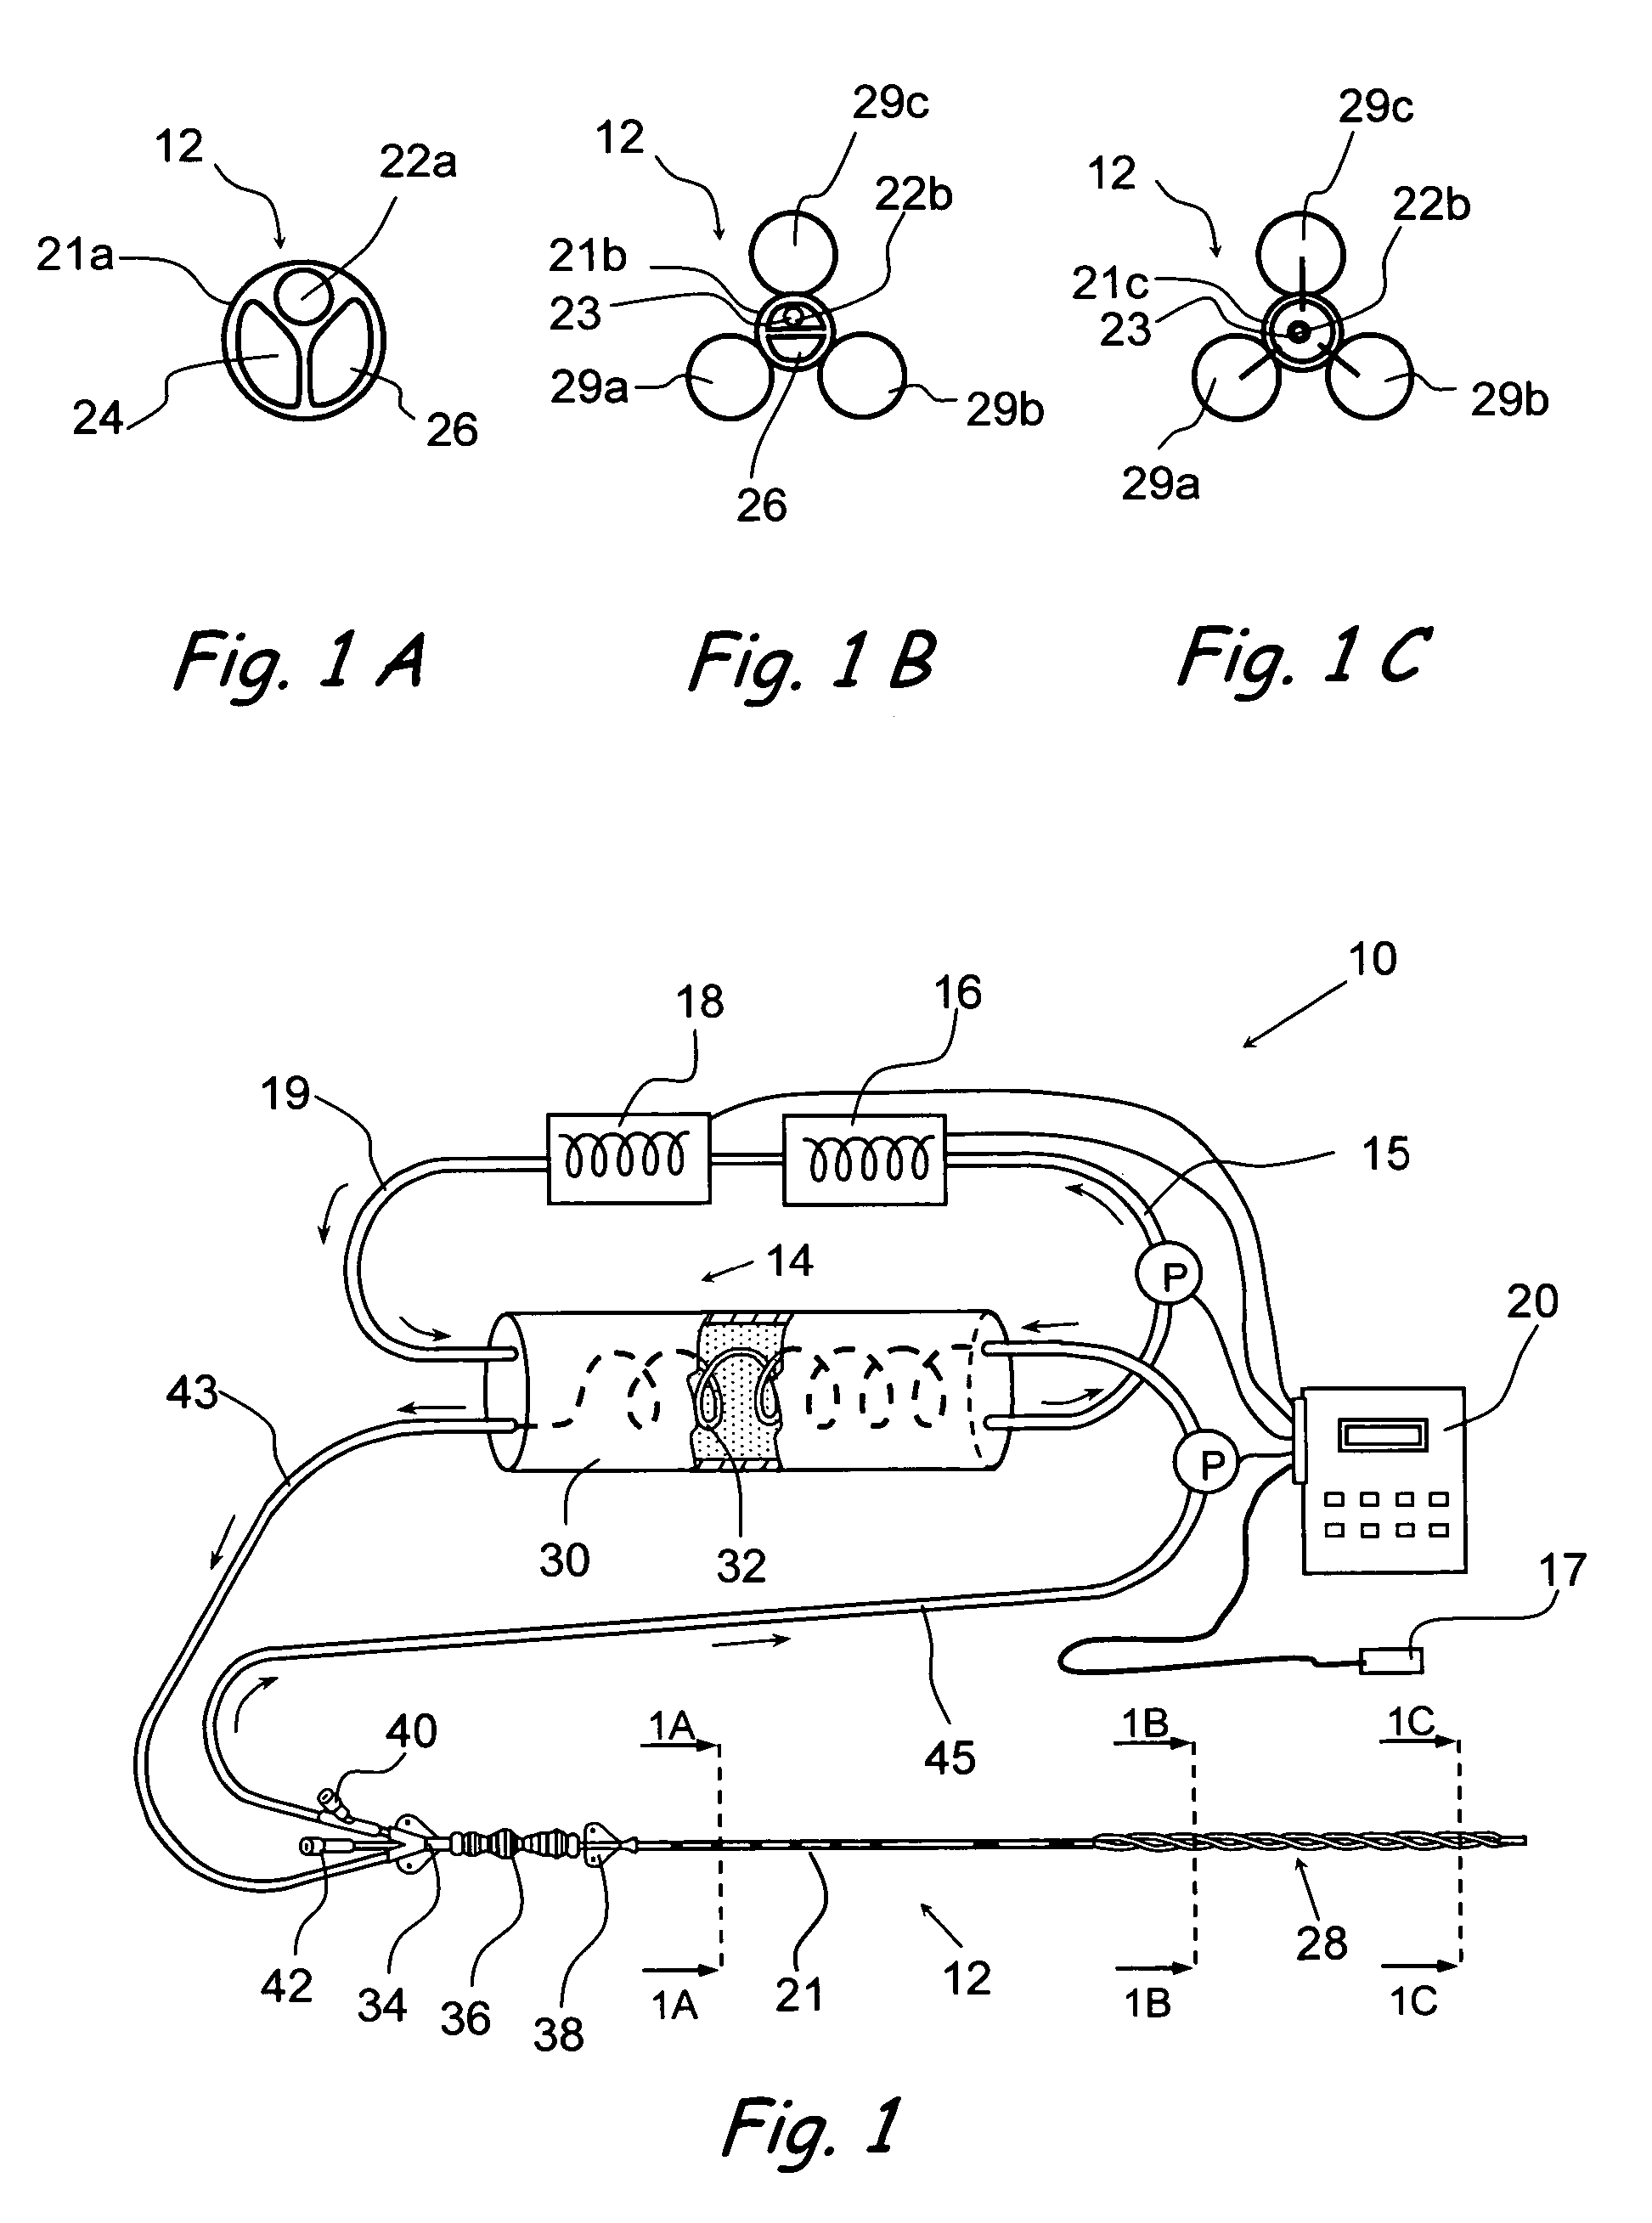 Devices, systems and methods for rapid endovascular cooling